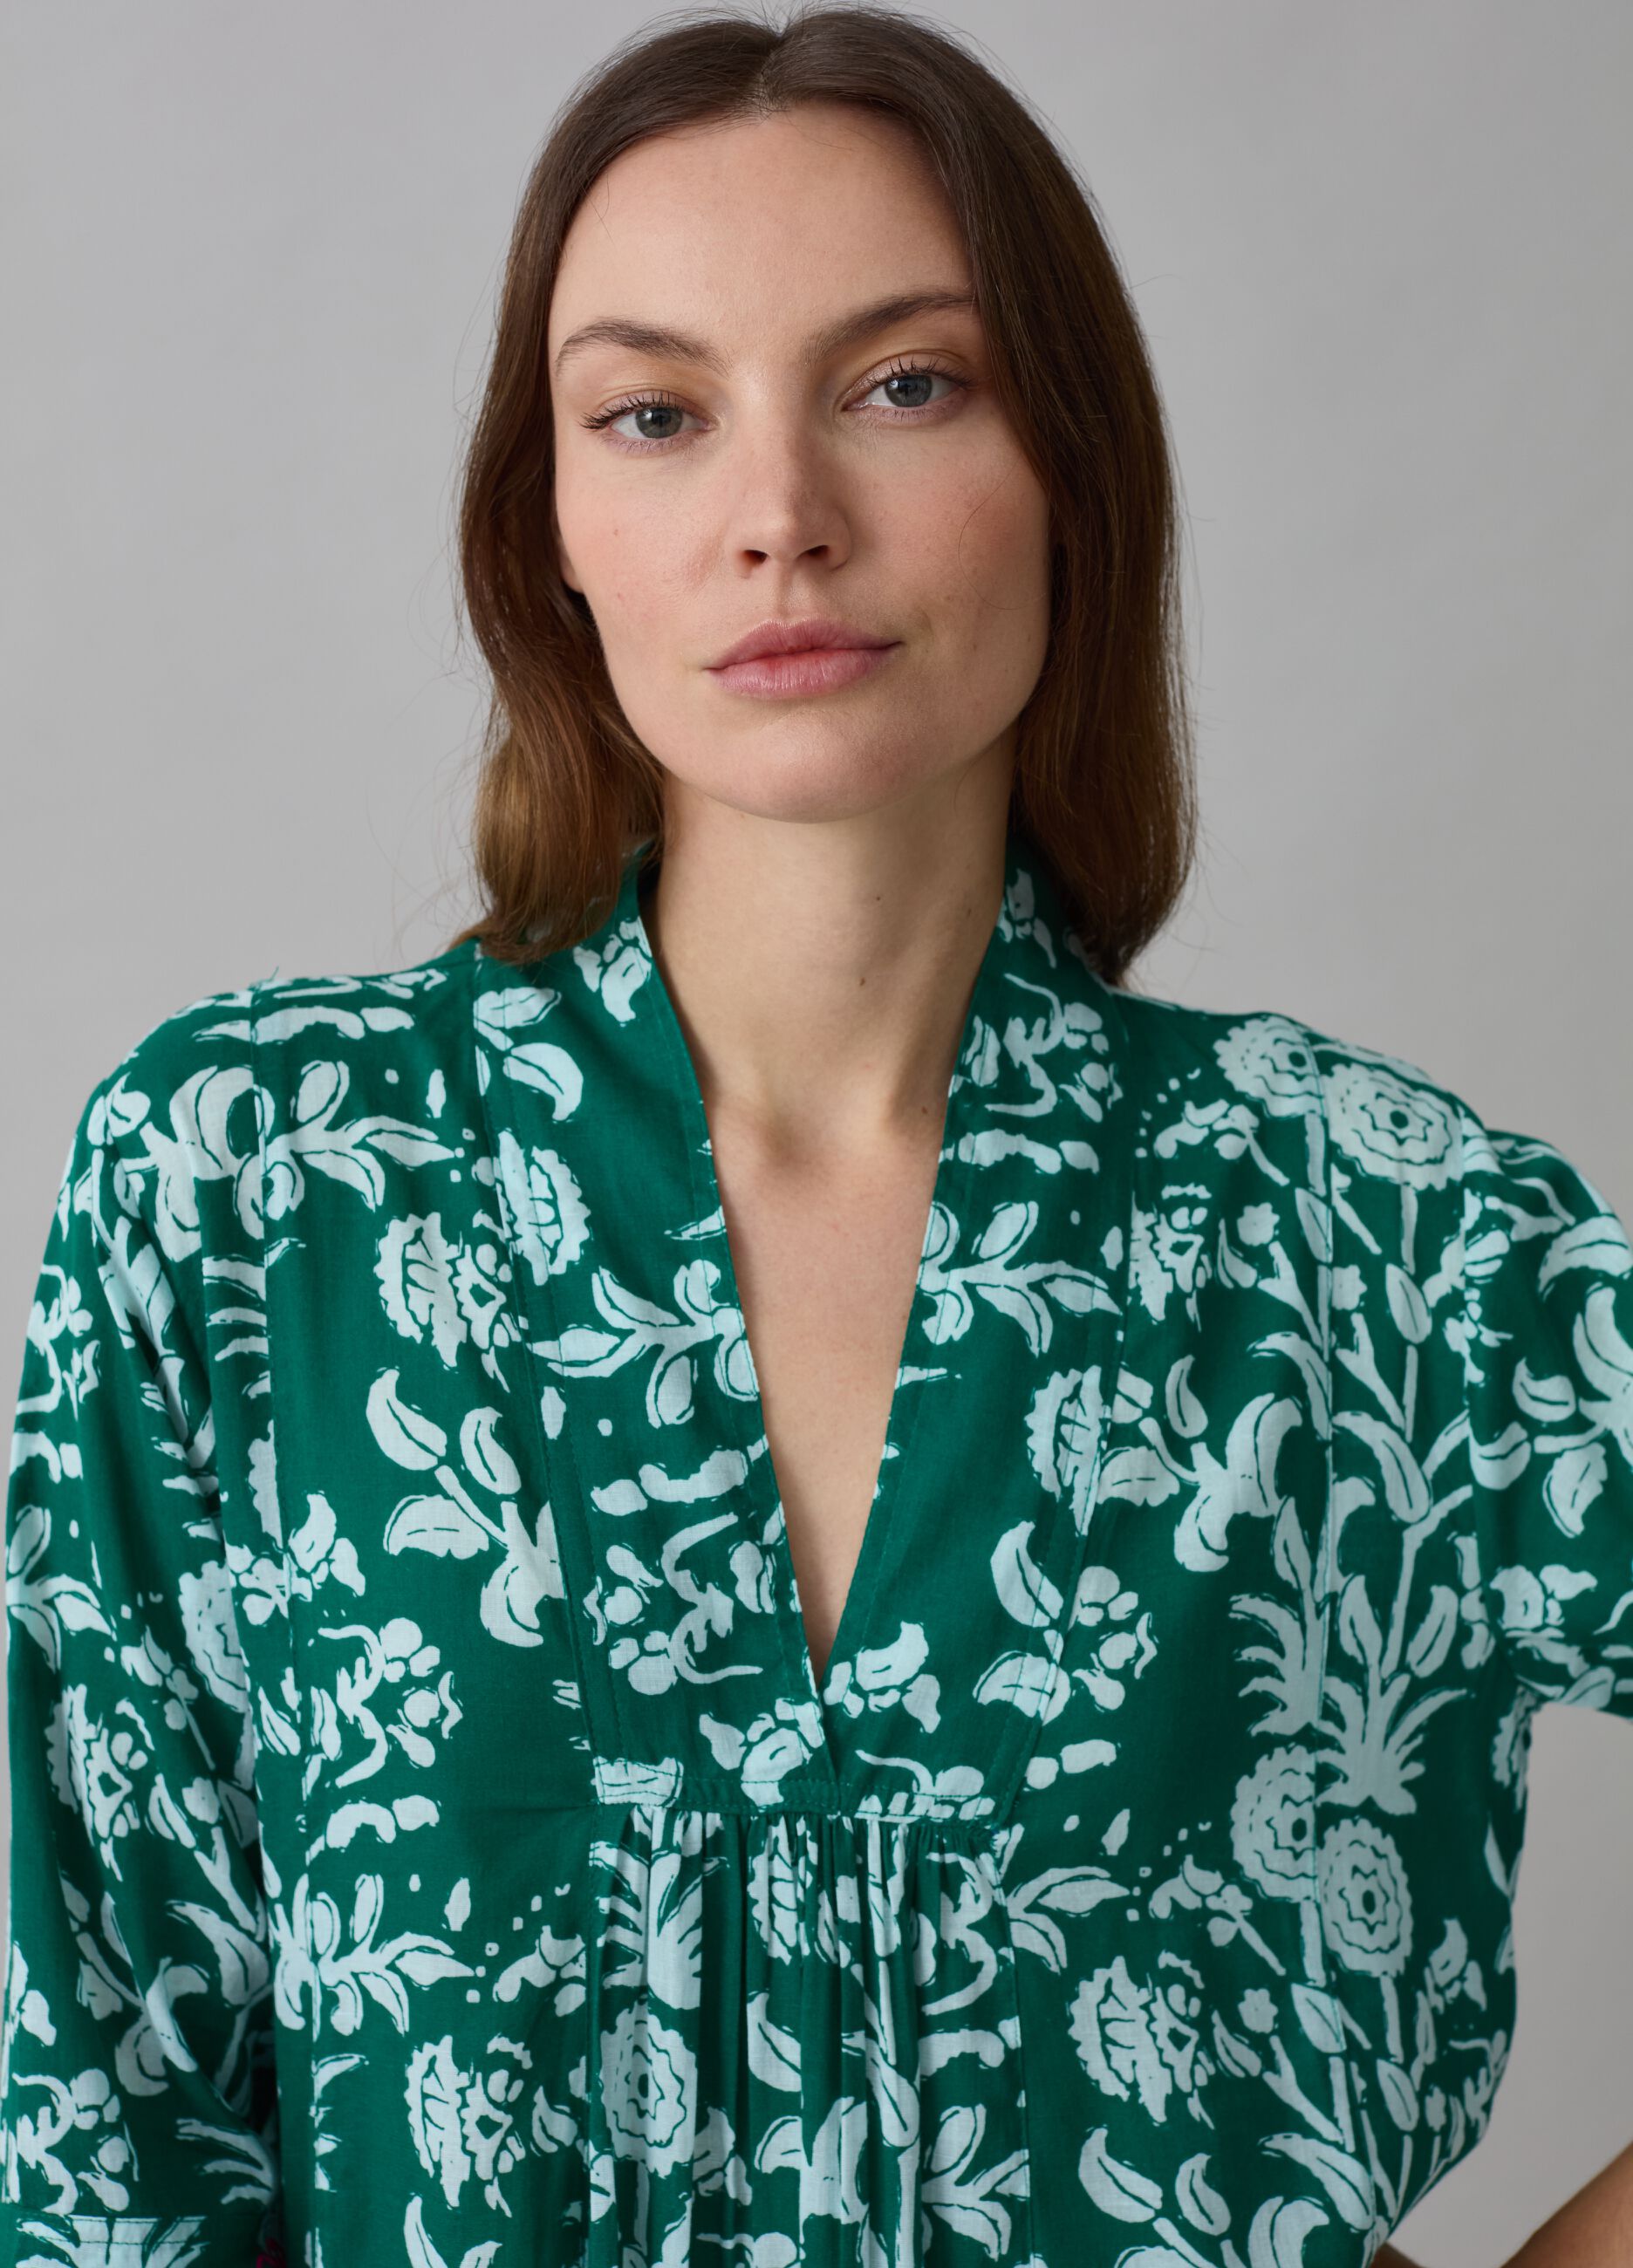 Beach cover-up kaftan with print and embroidery